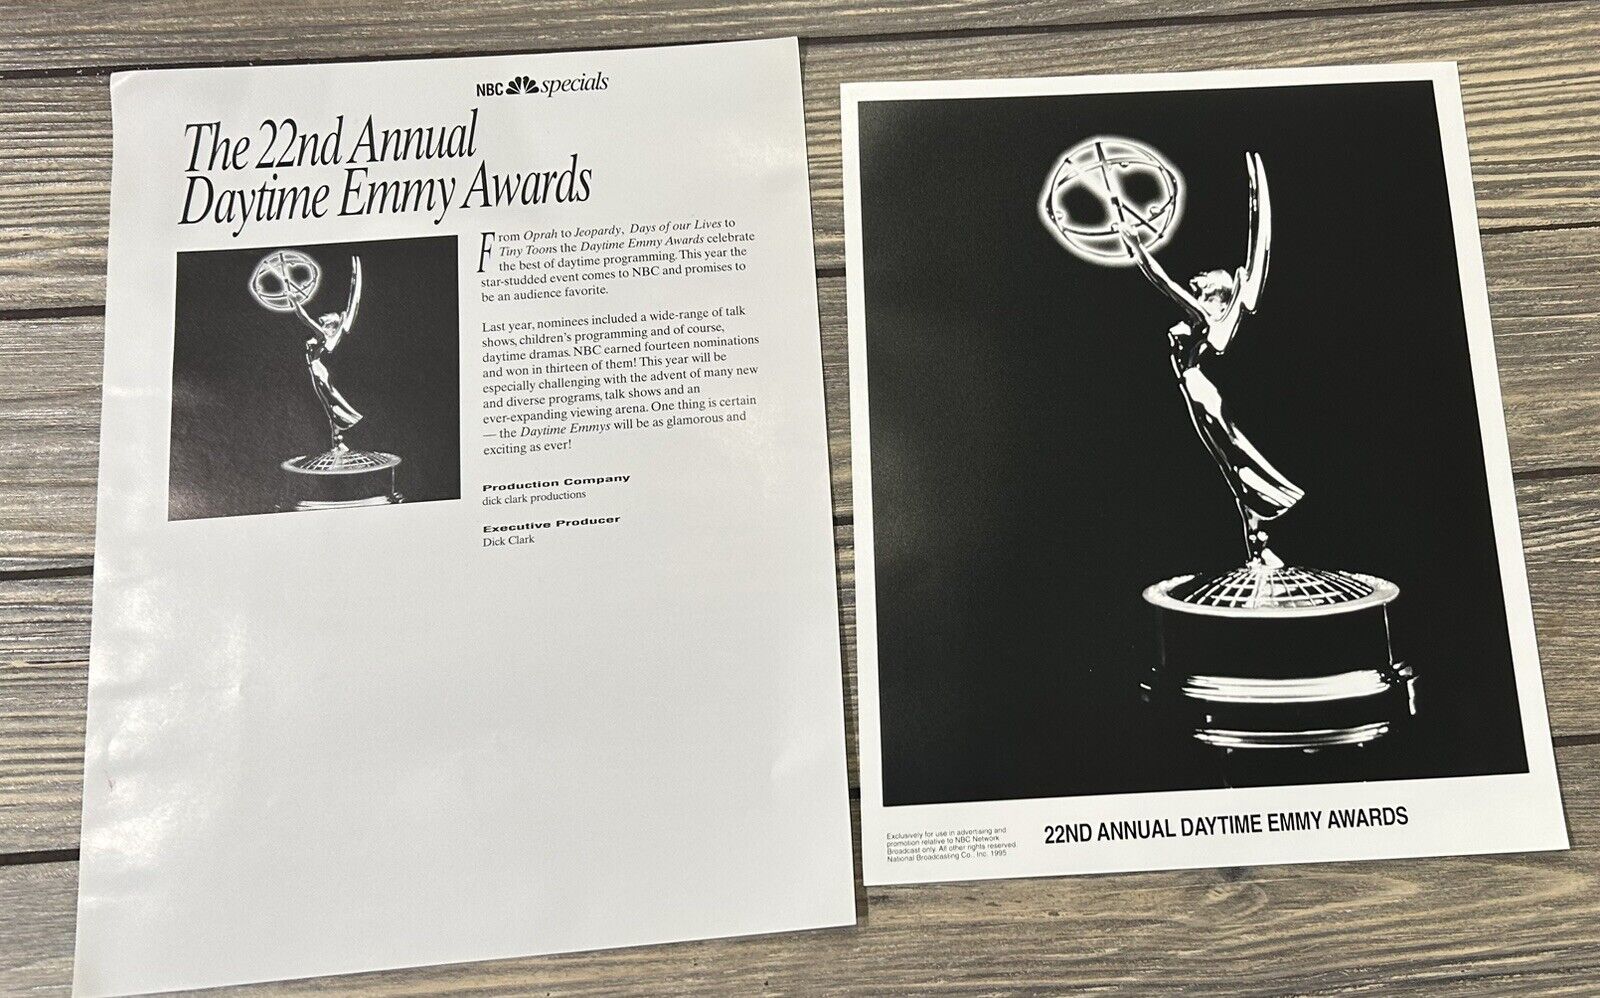 Vintage NBC Specials The 22nd Annual Daytime Emmy Awards Photo and Paper Press